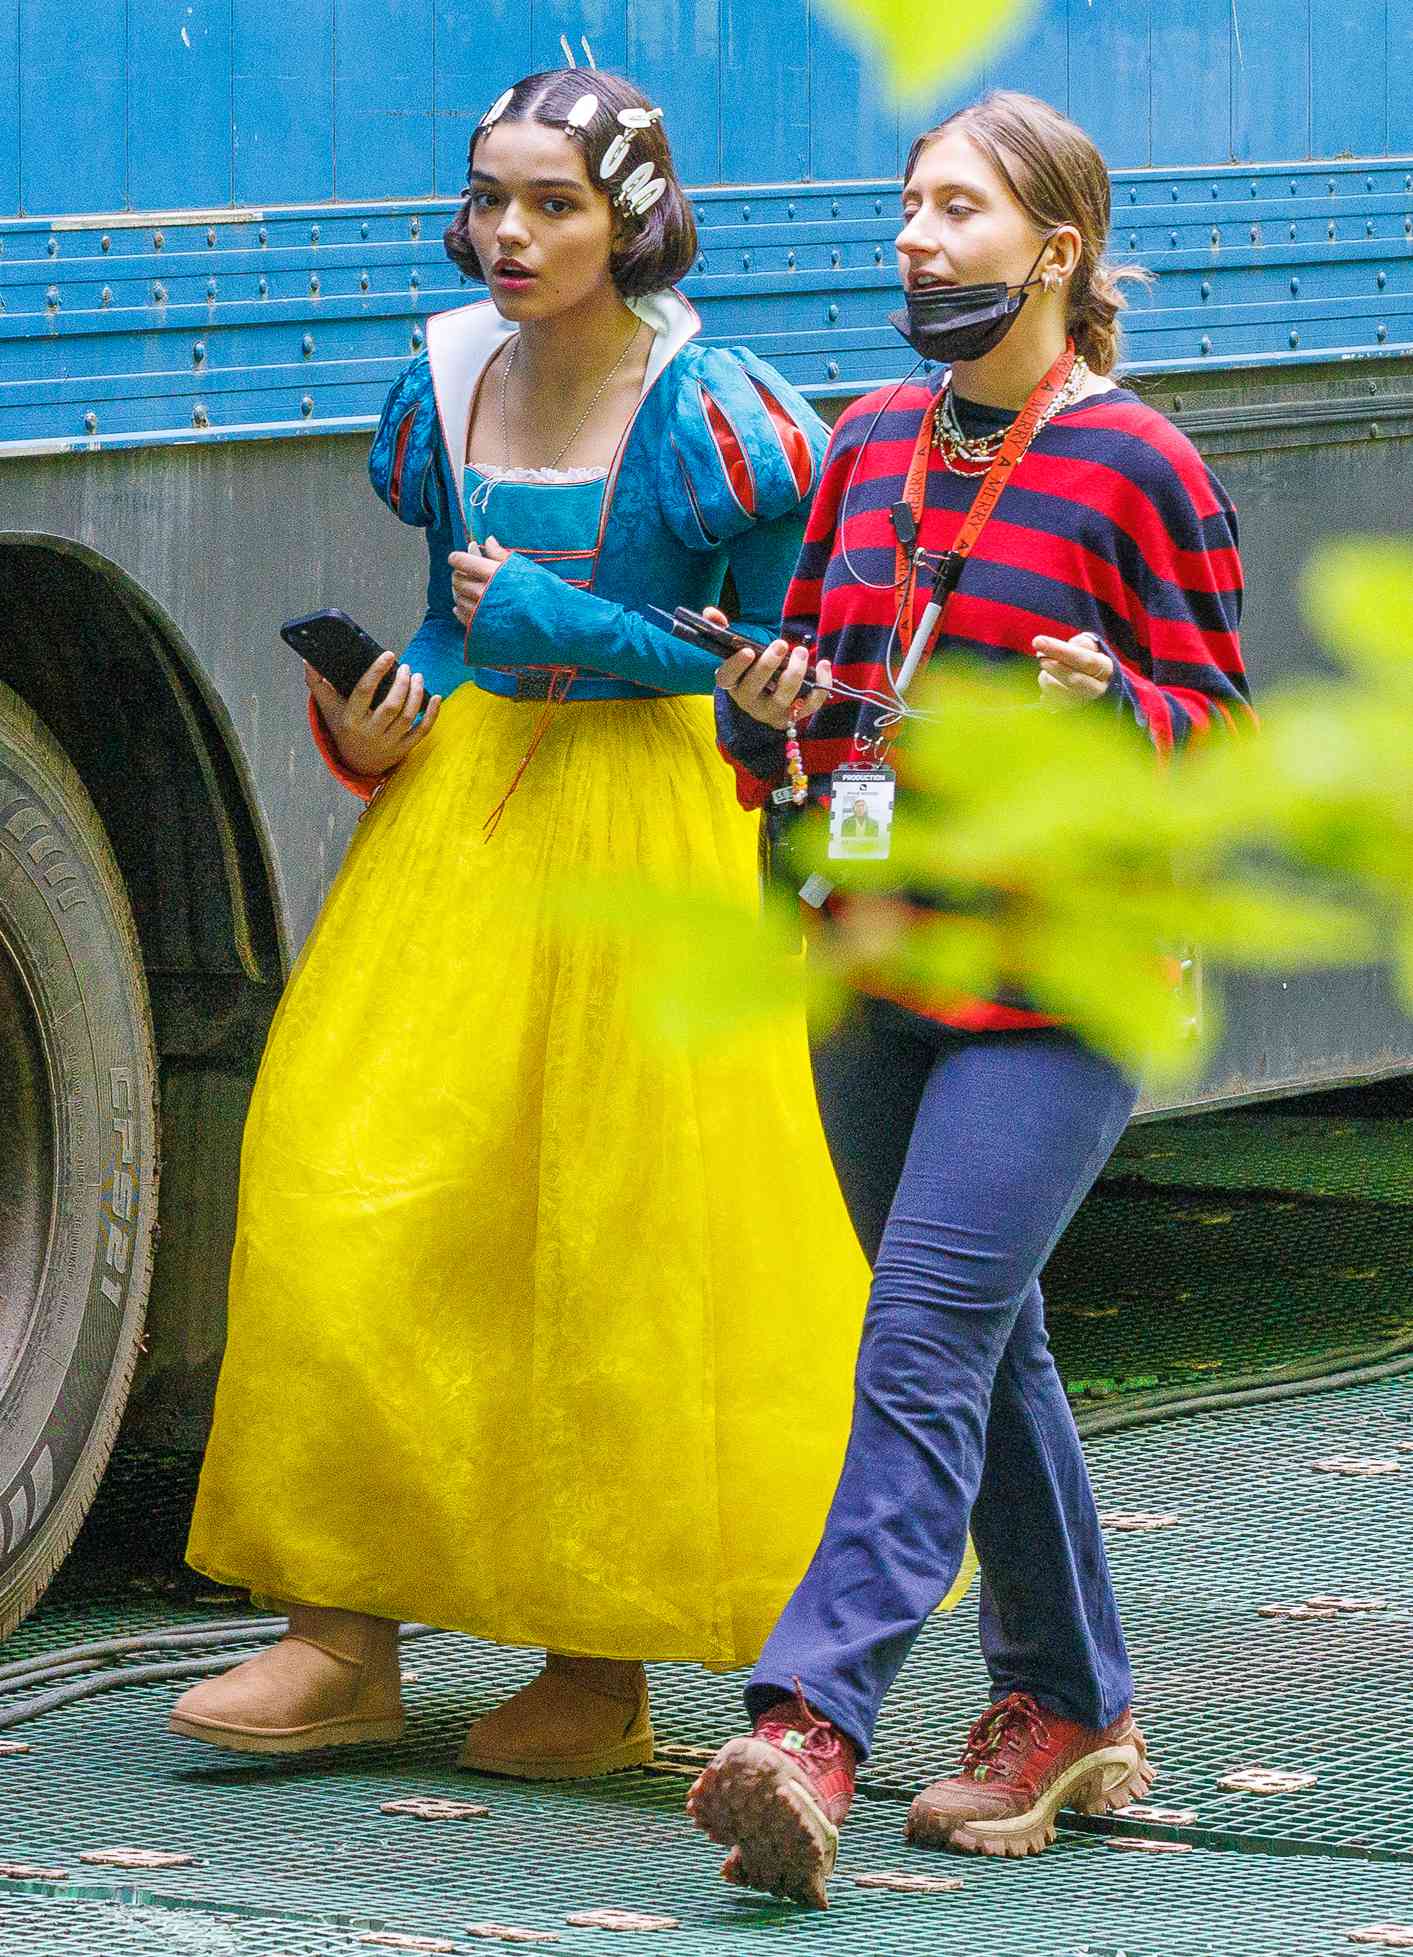 EXCLUSIVE: NO WEB BEFORE 3.30PM GMT 21ST MAY 2022 - The first look at Rachel Zegler playing Snow White in the Disney live action remake of the classic fairytale. The Golden Globe winning actress, who shot to fame as Maria Vasquez in the 2021 musical drama West Side Story, was spotted on set for the first time wearing her Snow White costume in London. Zegler faced an angry backlash after the casting was announced, with some people claiming it was wrong to cast a Latina actor in the role. She brushed off the criticism and said she was very excited to bring the role to life. Disney has faced mounting criticism in October 2020 added a content warning for racism in classic films admitting to negative depictions and mistreatment of people from differing cultures. Casting Rachel, who is of Colombian descent, appears to be a push to change the narrative and perception many have of the Disney brand. Pictured: Rachel Zegler Ref: SPL5311113 180522 EXCLUSIVE Picture by: Spartacus / SplashNews.com Splash News and Pictures USA: +1 310-525-5808 London: +44 (0)20 8126 1009 Berlin: +49 175 3764 166 photodesk@splashnews.com World Rights